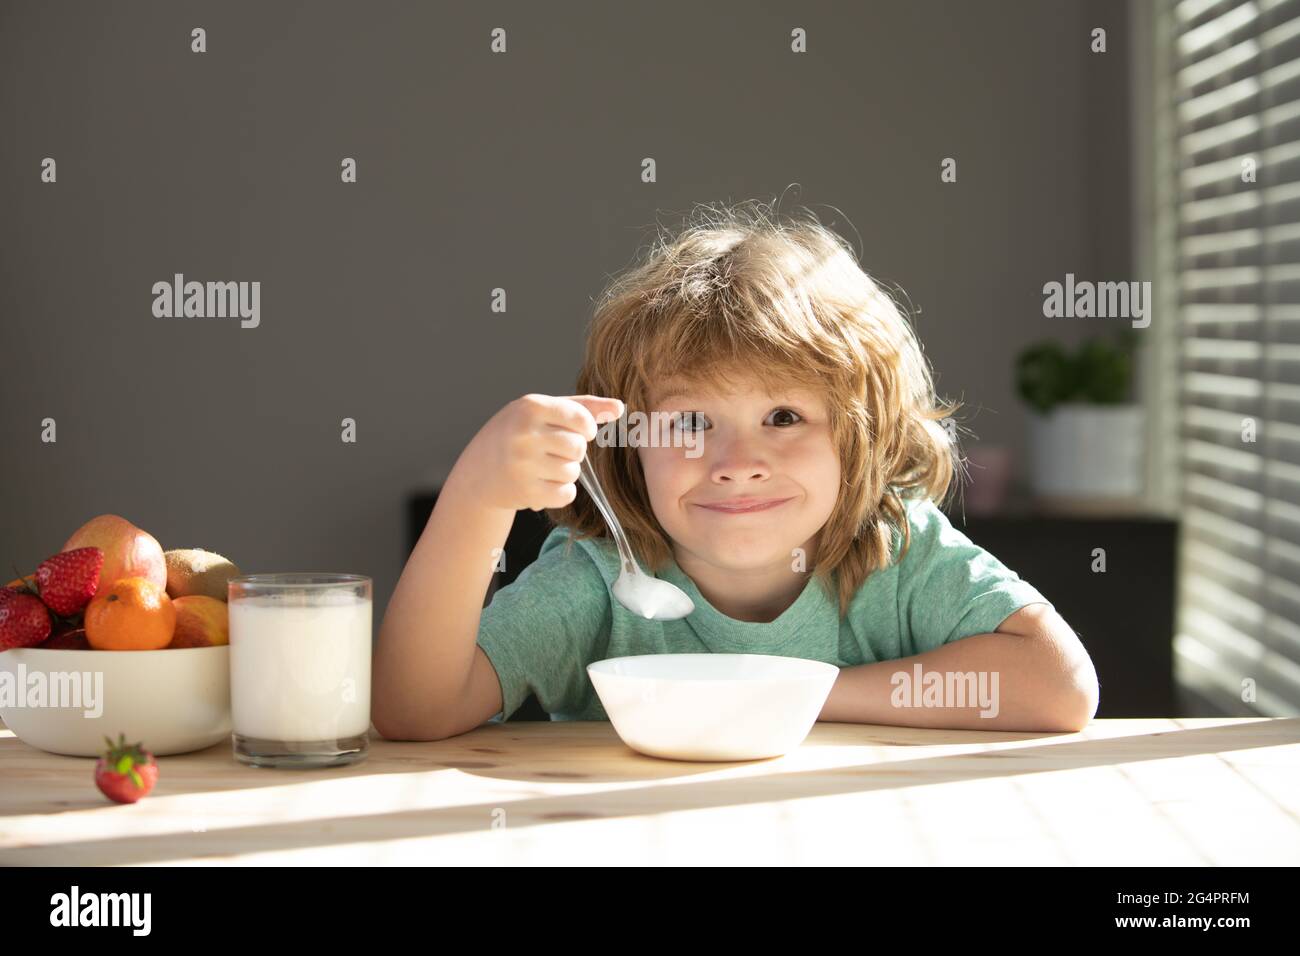 Child eating healthy food. Cute little boy having soup for lunch. Stock Photo